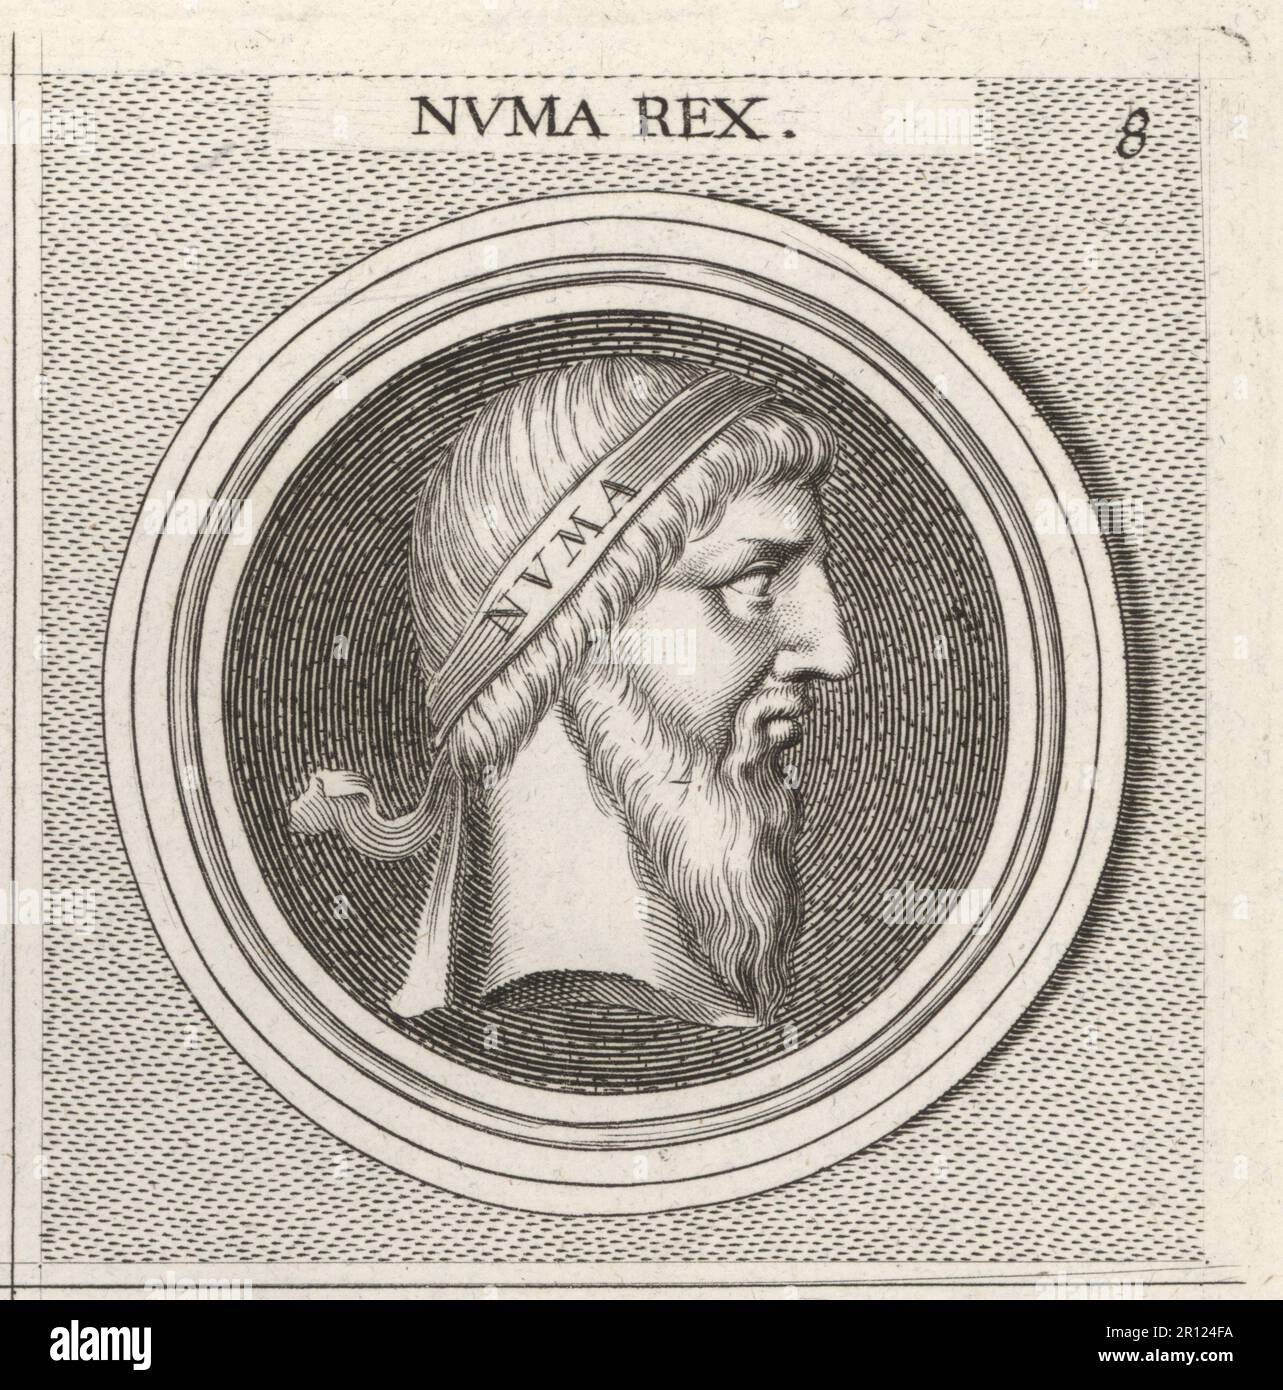 Numa Pompilius, legendary second king of Rome, c.753–672 BC. Credited with the invention of the Roman calendar, Vestal Virgins, the cults of Mars, Jupiter and Romulus, and the office of pontifex maximus. Numa Rex. Copperplate engraving after an illustration by Joachim von Sandrart from his L’Academia Todesca, della Architectura, Scultura & Pittura, oder Teutsche Academie, der Edlen Bau- Bild- und Mahlerey-Kunste, German Academy of Architecture, Sculpture and Painting, Jacob von Sandrart, Nuremberg, 1675. Stock Photo